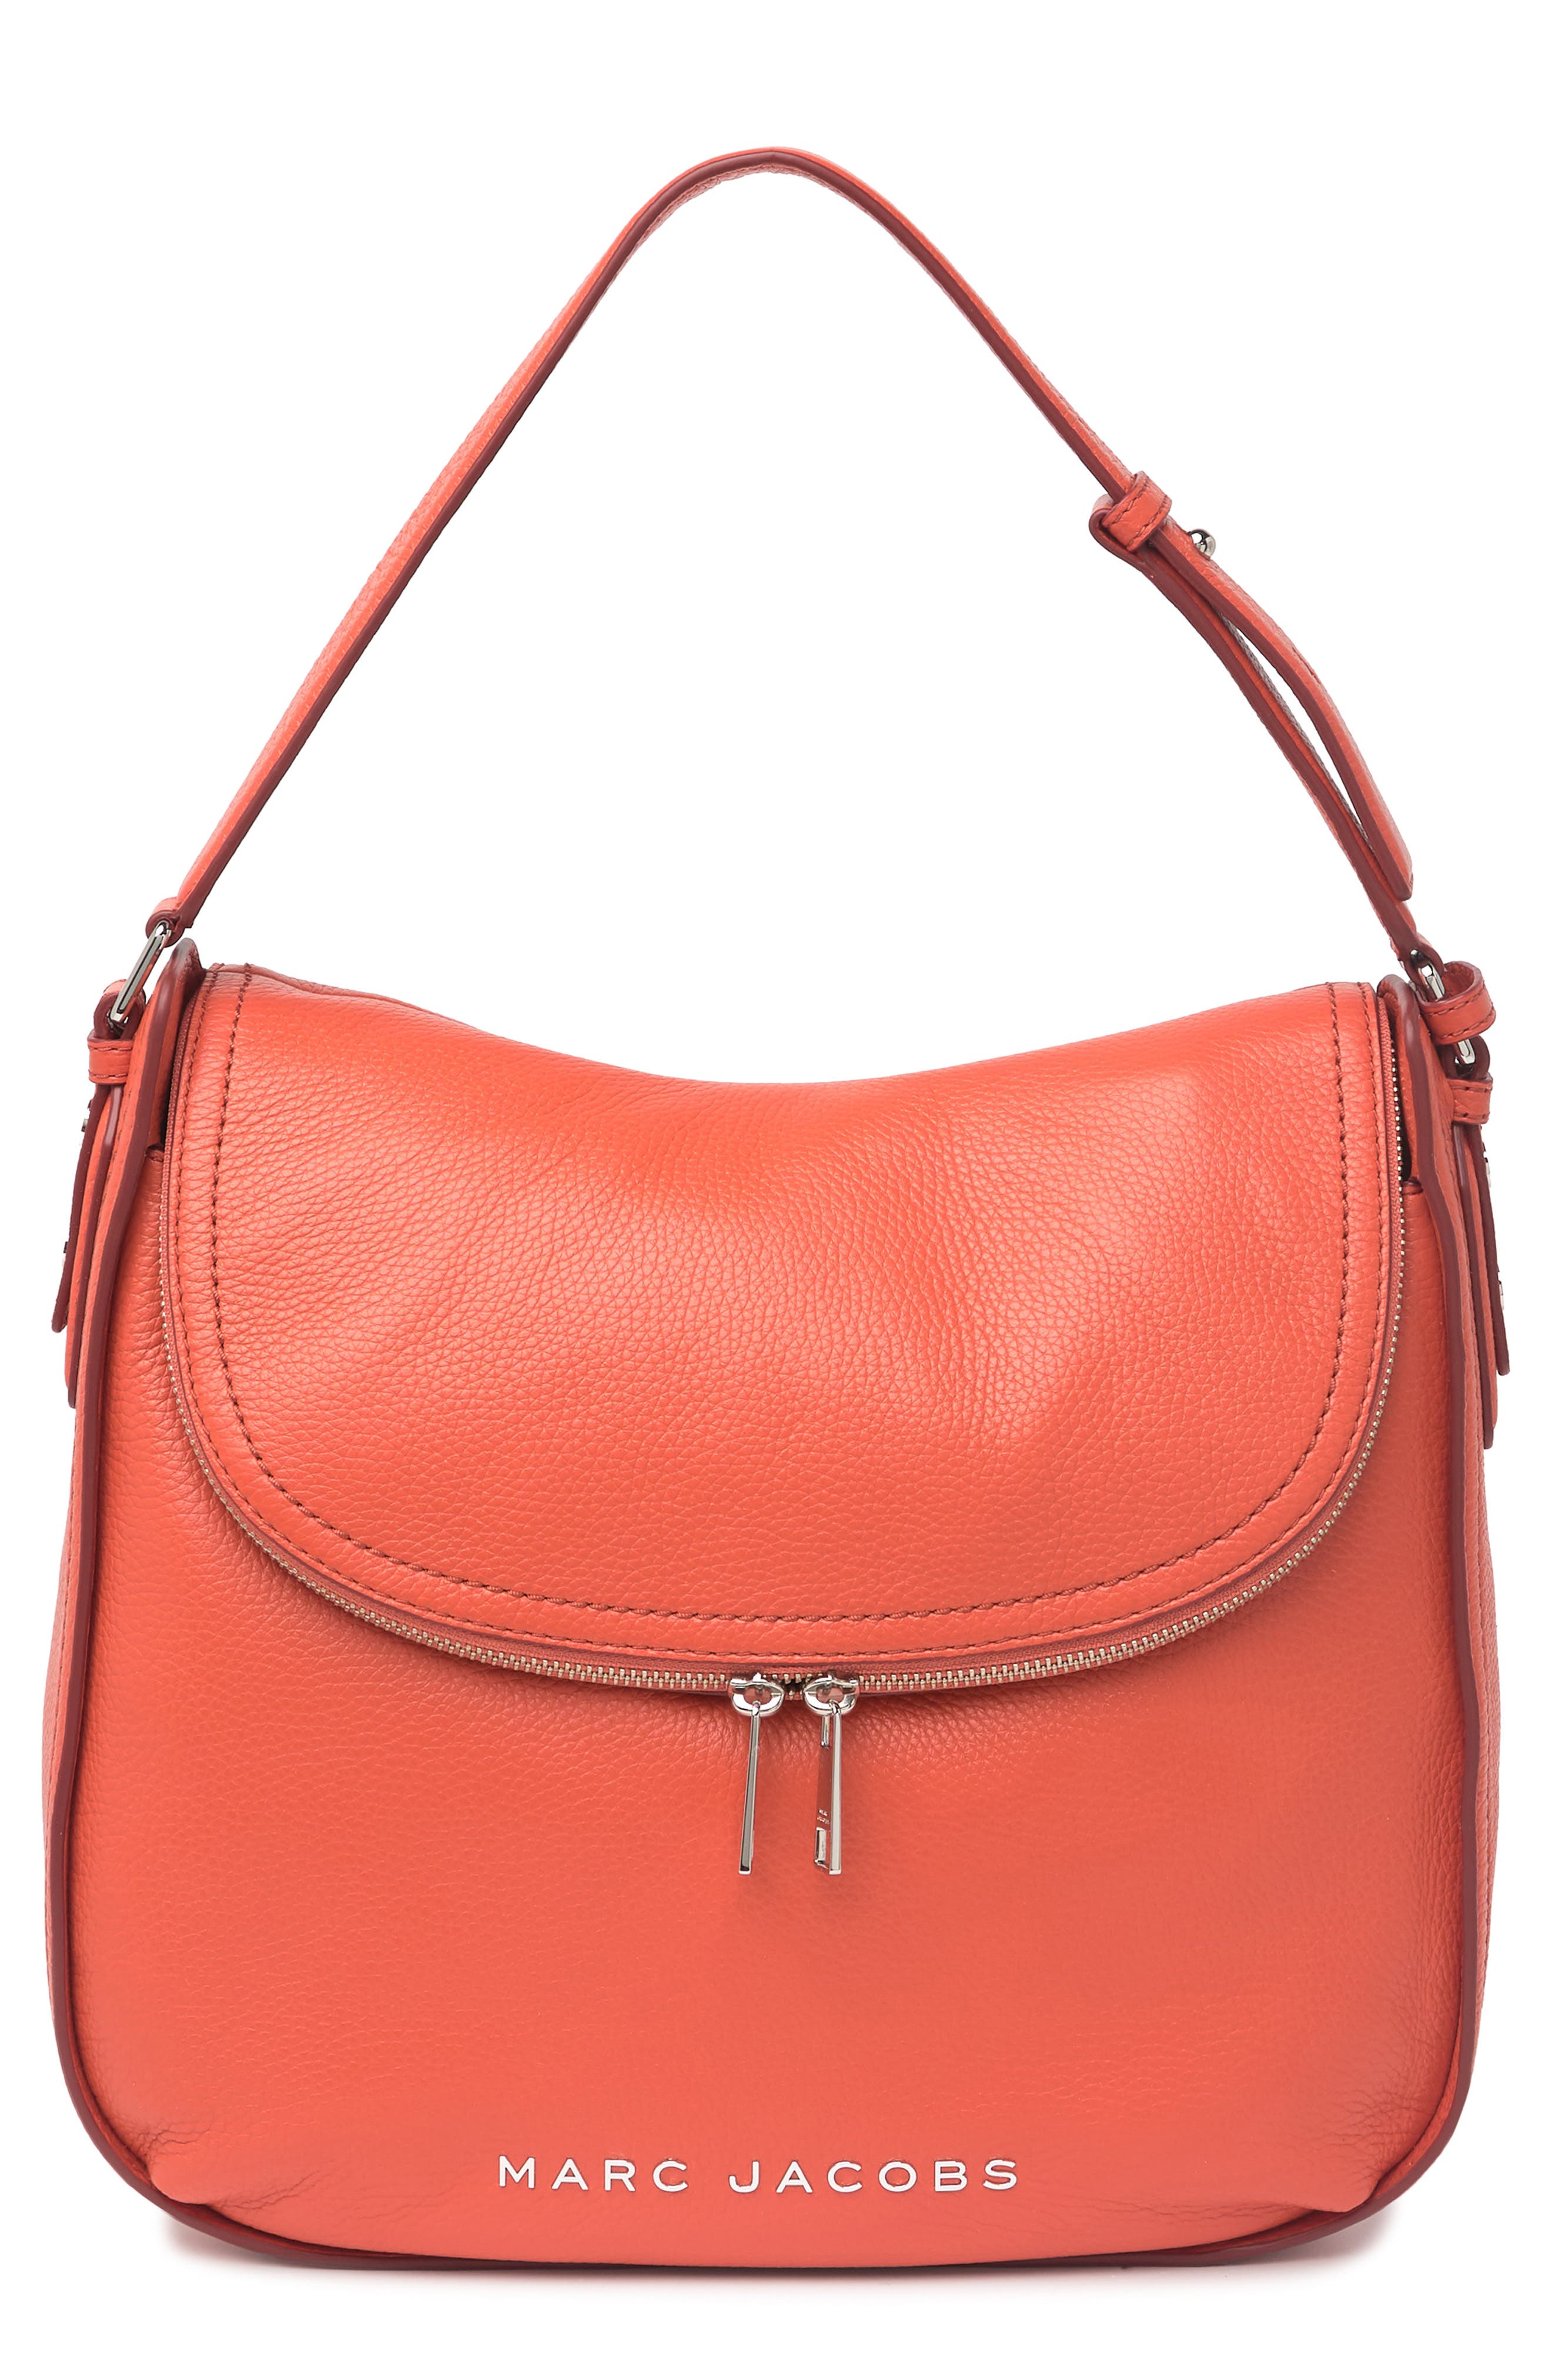 Marc Jacobs Leather Hobo In Peach Blossom